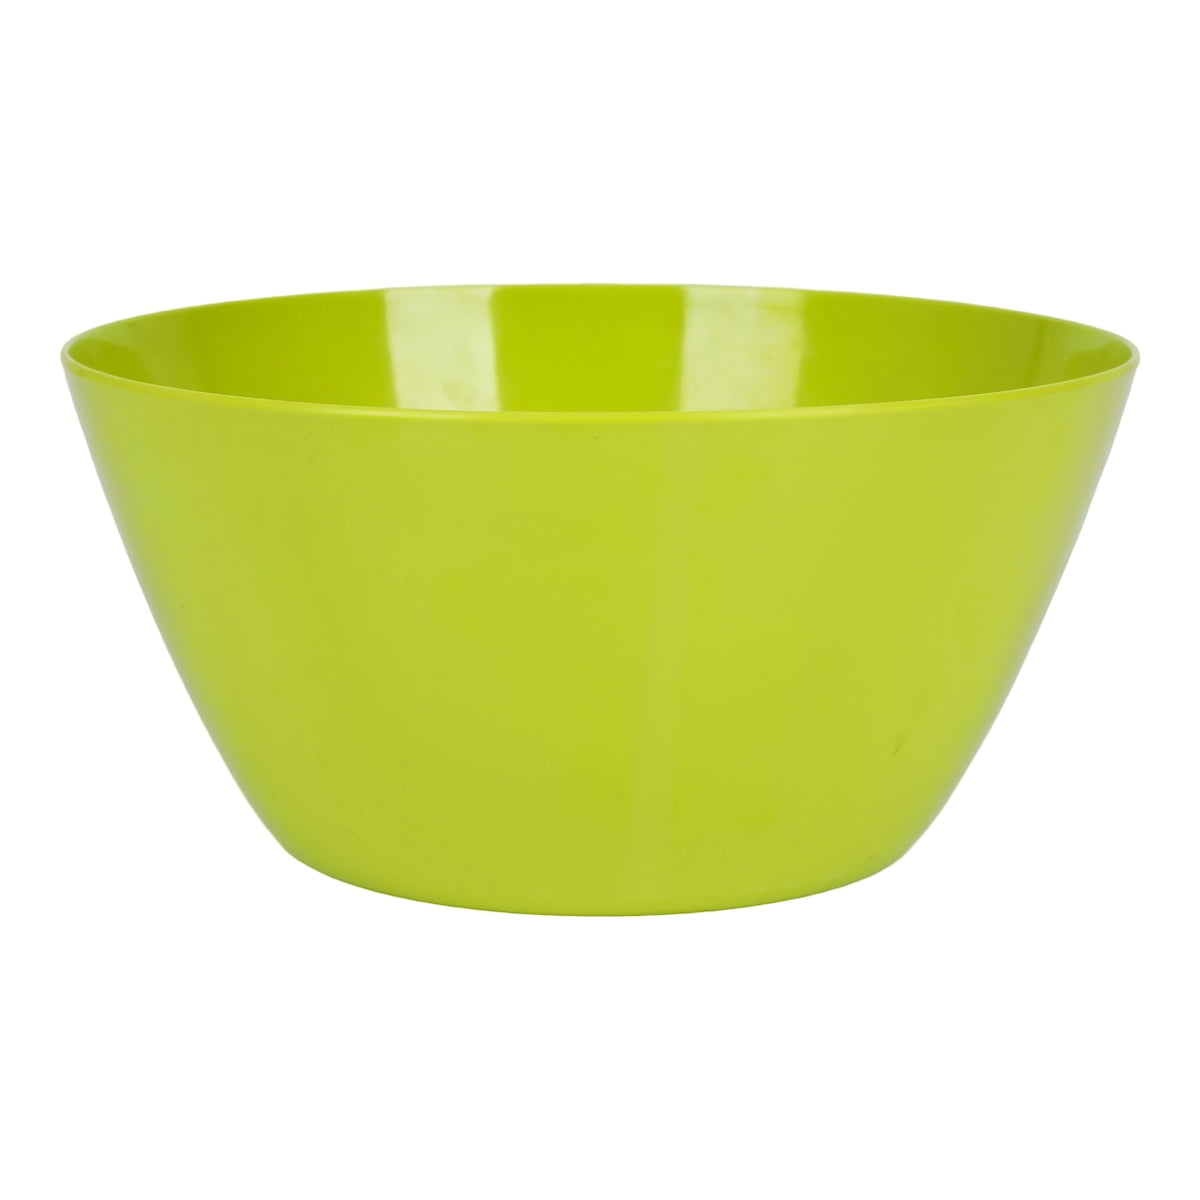 The Grinch Character Face 10 Serving Bowl